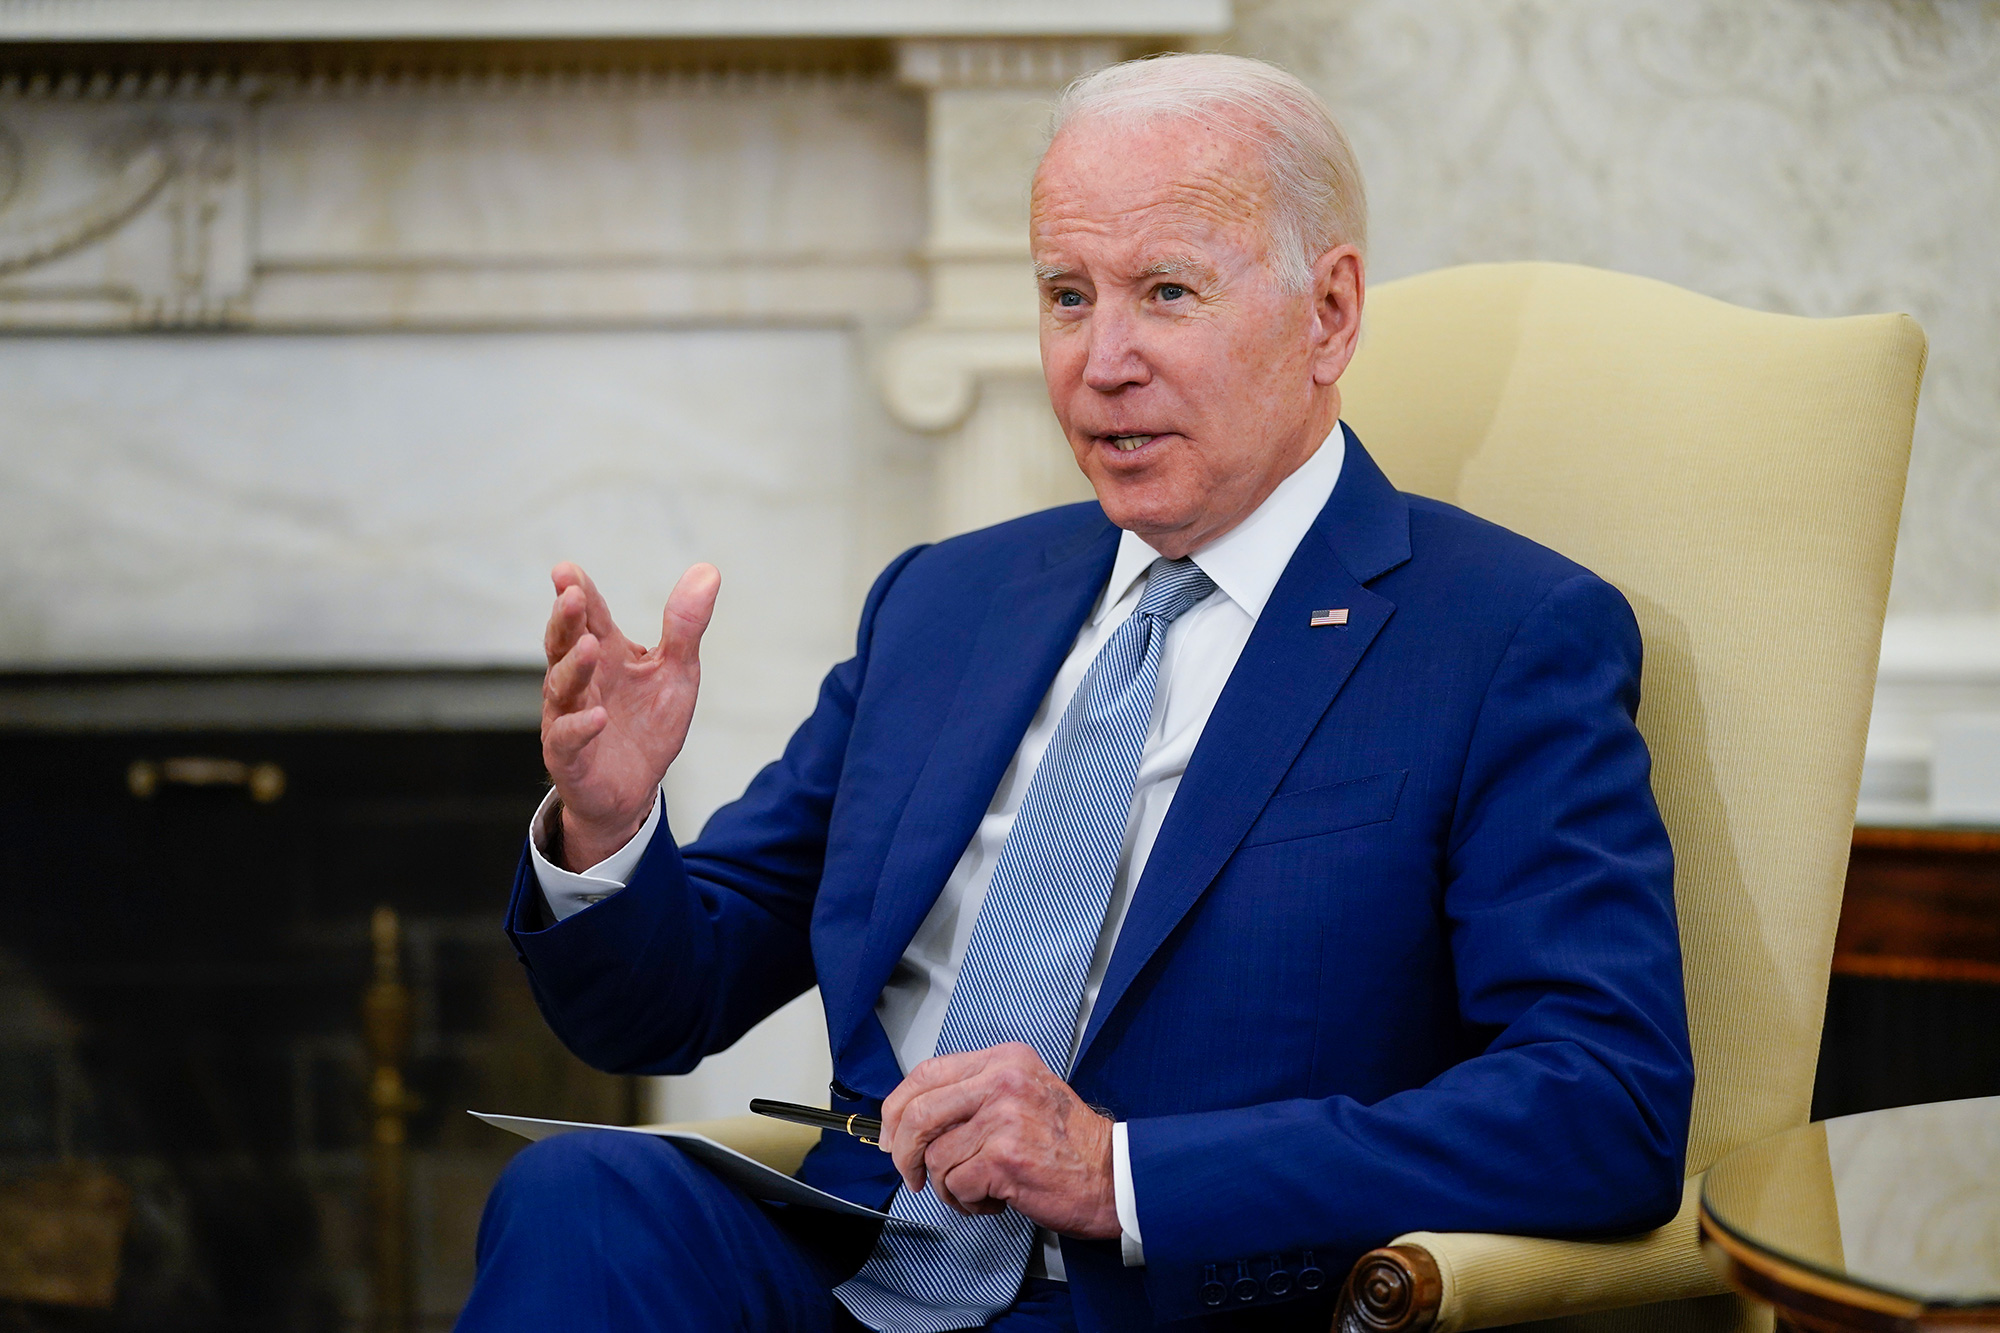 President Joe Biden speaks in the Oval Office of the White House on Tuesday, May 31.